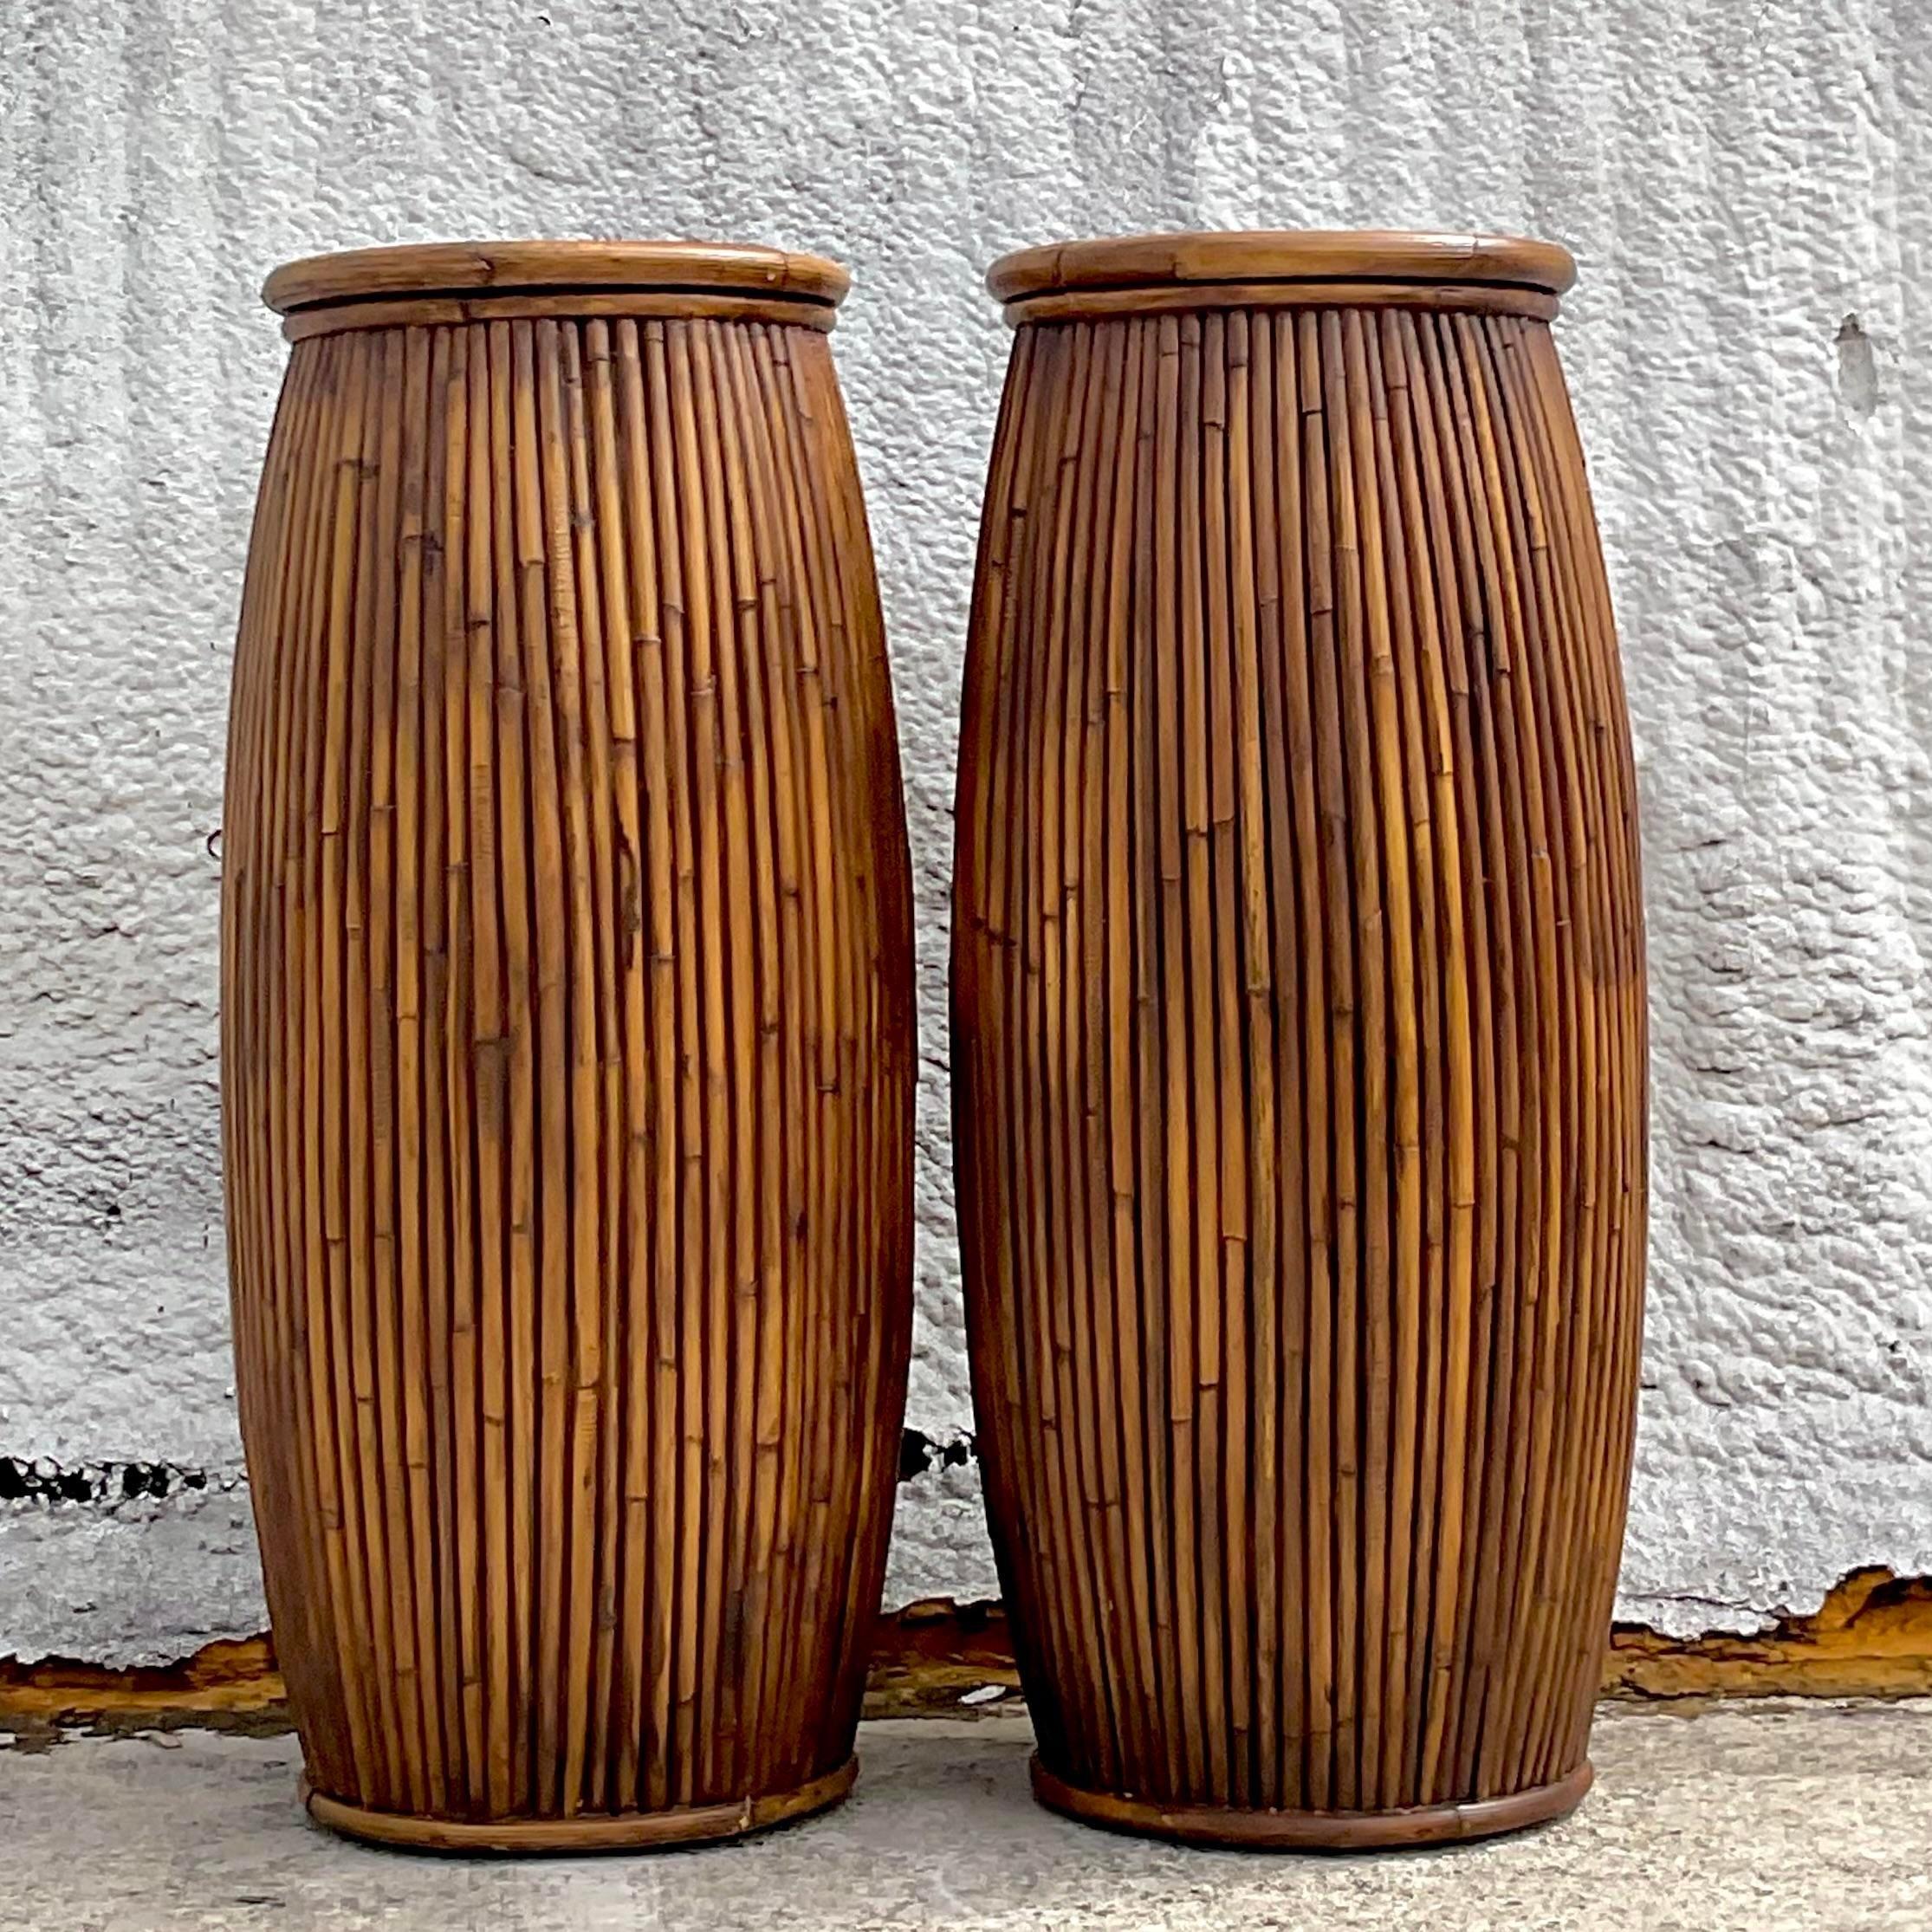 A Stunning pair of vintage Coastal pedestals. Made by the iconic Milling Road Baker group. Gorgeous pencil reed construction in a clean and simple design. Acquired from a Palm Beach estate.